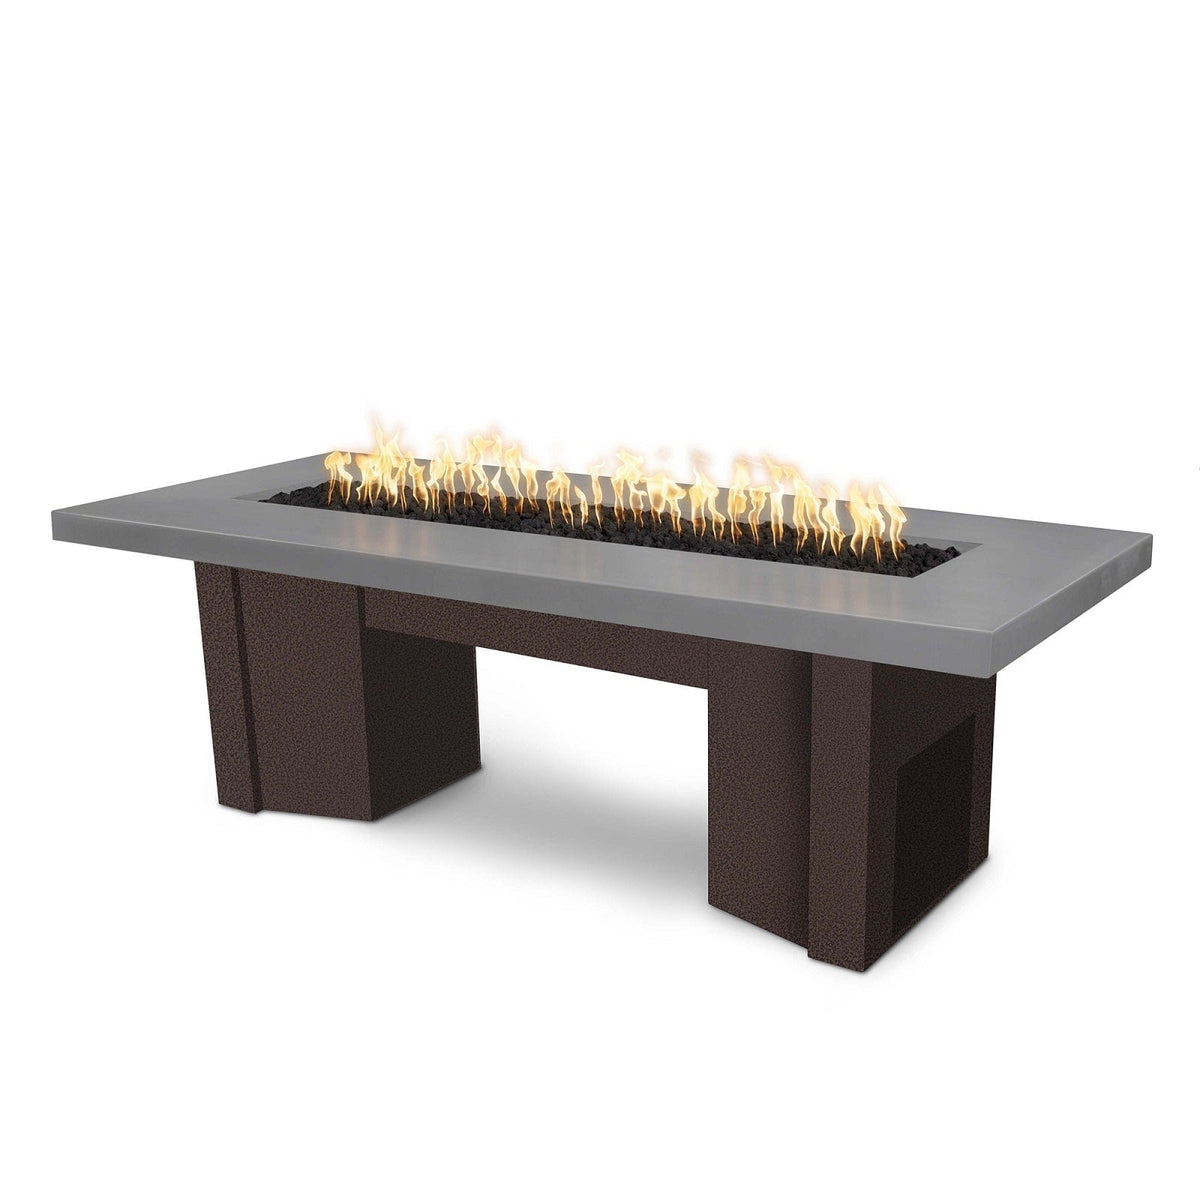 The Outdoor Plus Fire Features Natural Gray (-NGY) / Copper Vein Powder Coated Steel (-CPV) The Outdoor Plus 78&quot; Alameda Fire Table Smooth Concrete in Natural Gas - Match Lit / OPT-ALMGFRC78-NG